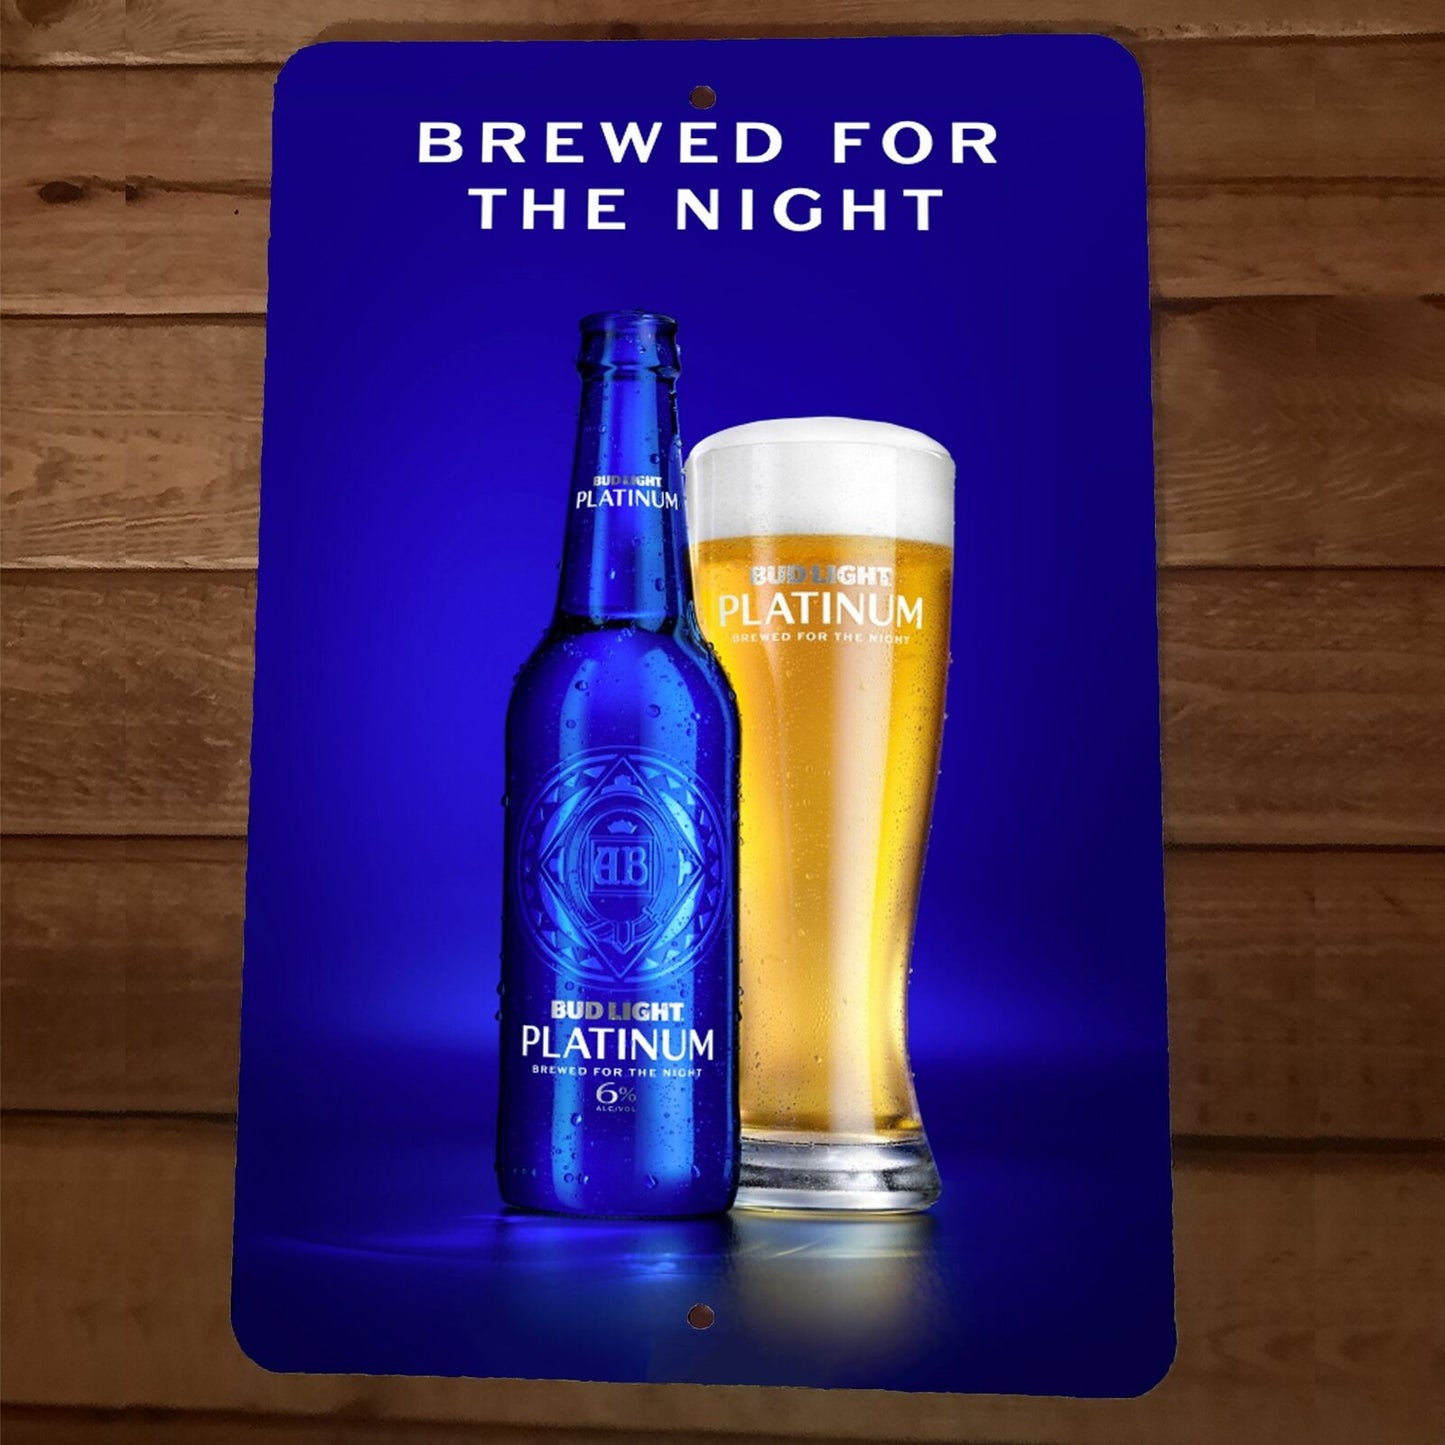 Brewed for the Night Bud Light Platinum Beer 8x12 Metal Wall Bar Sign